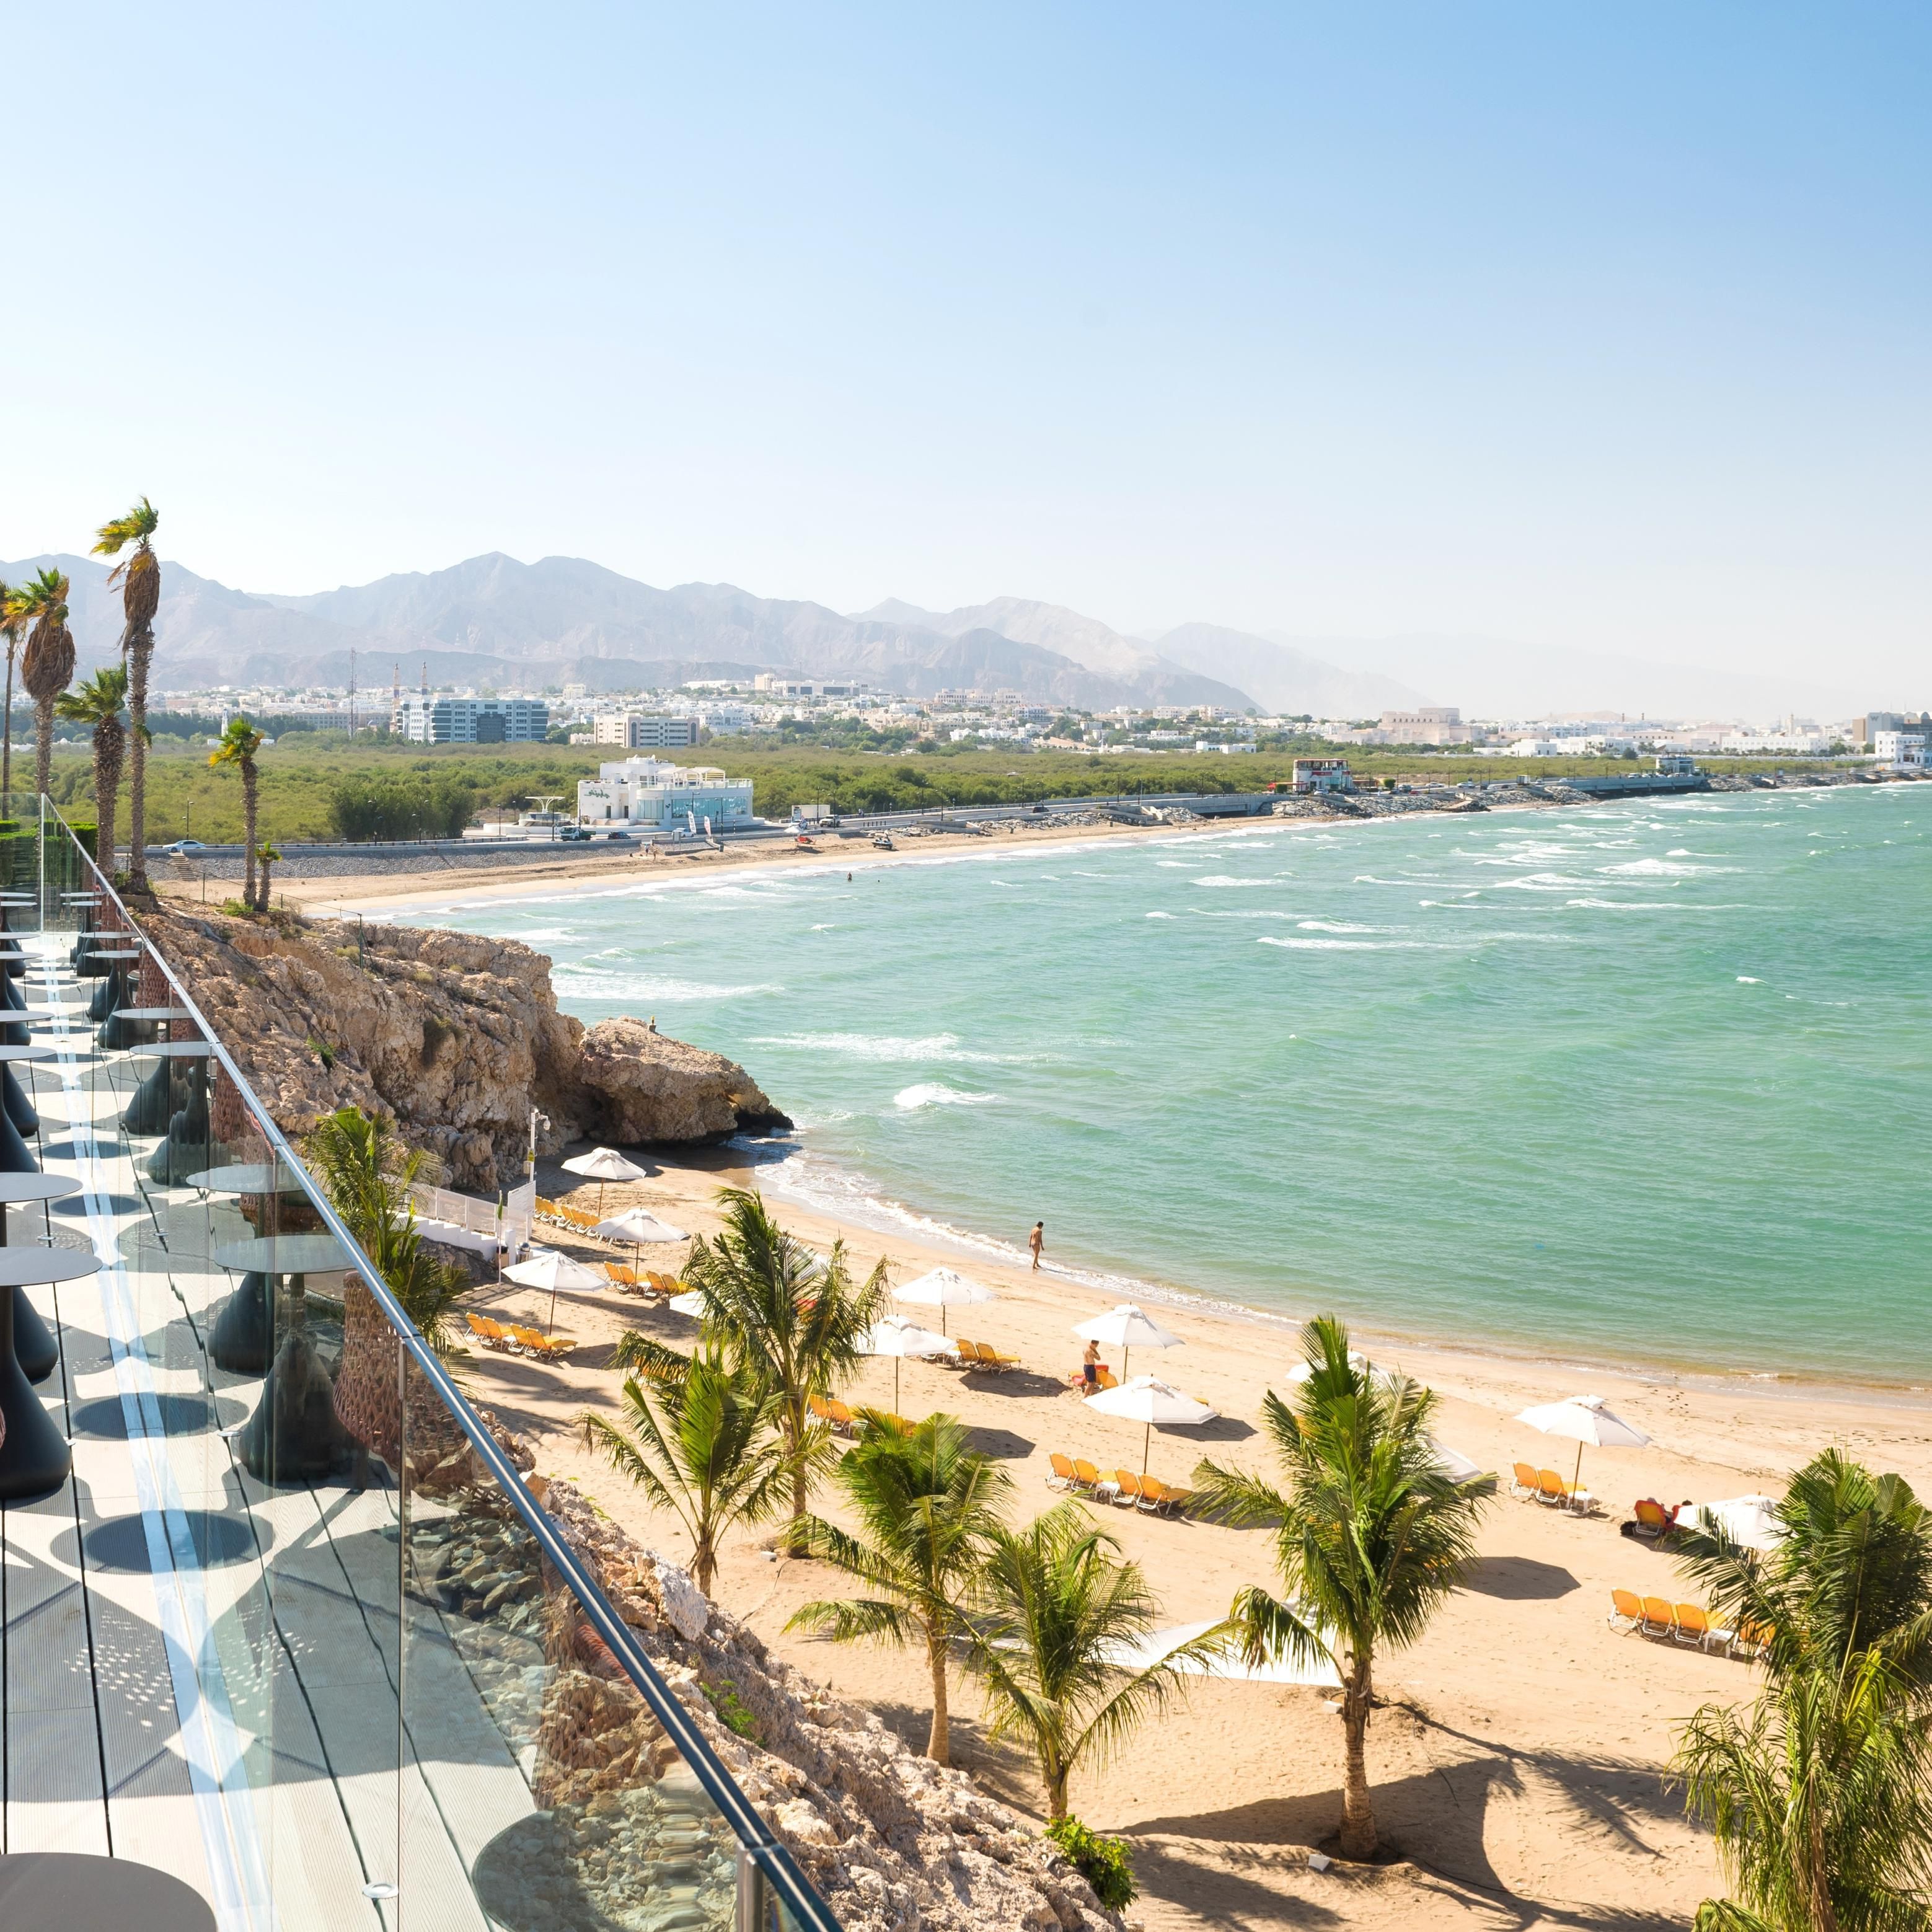 Views of the private beach and corniche from The Edge Restaurant